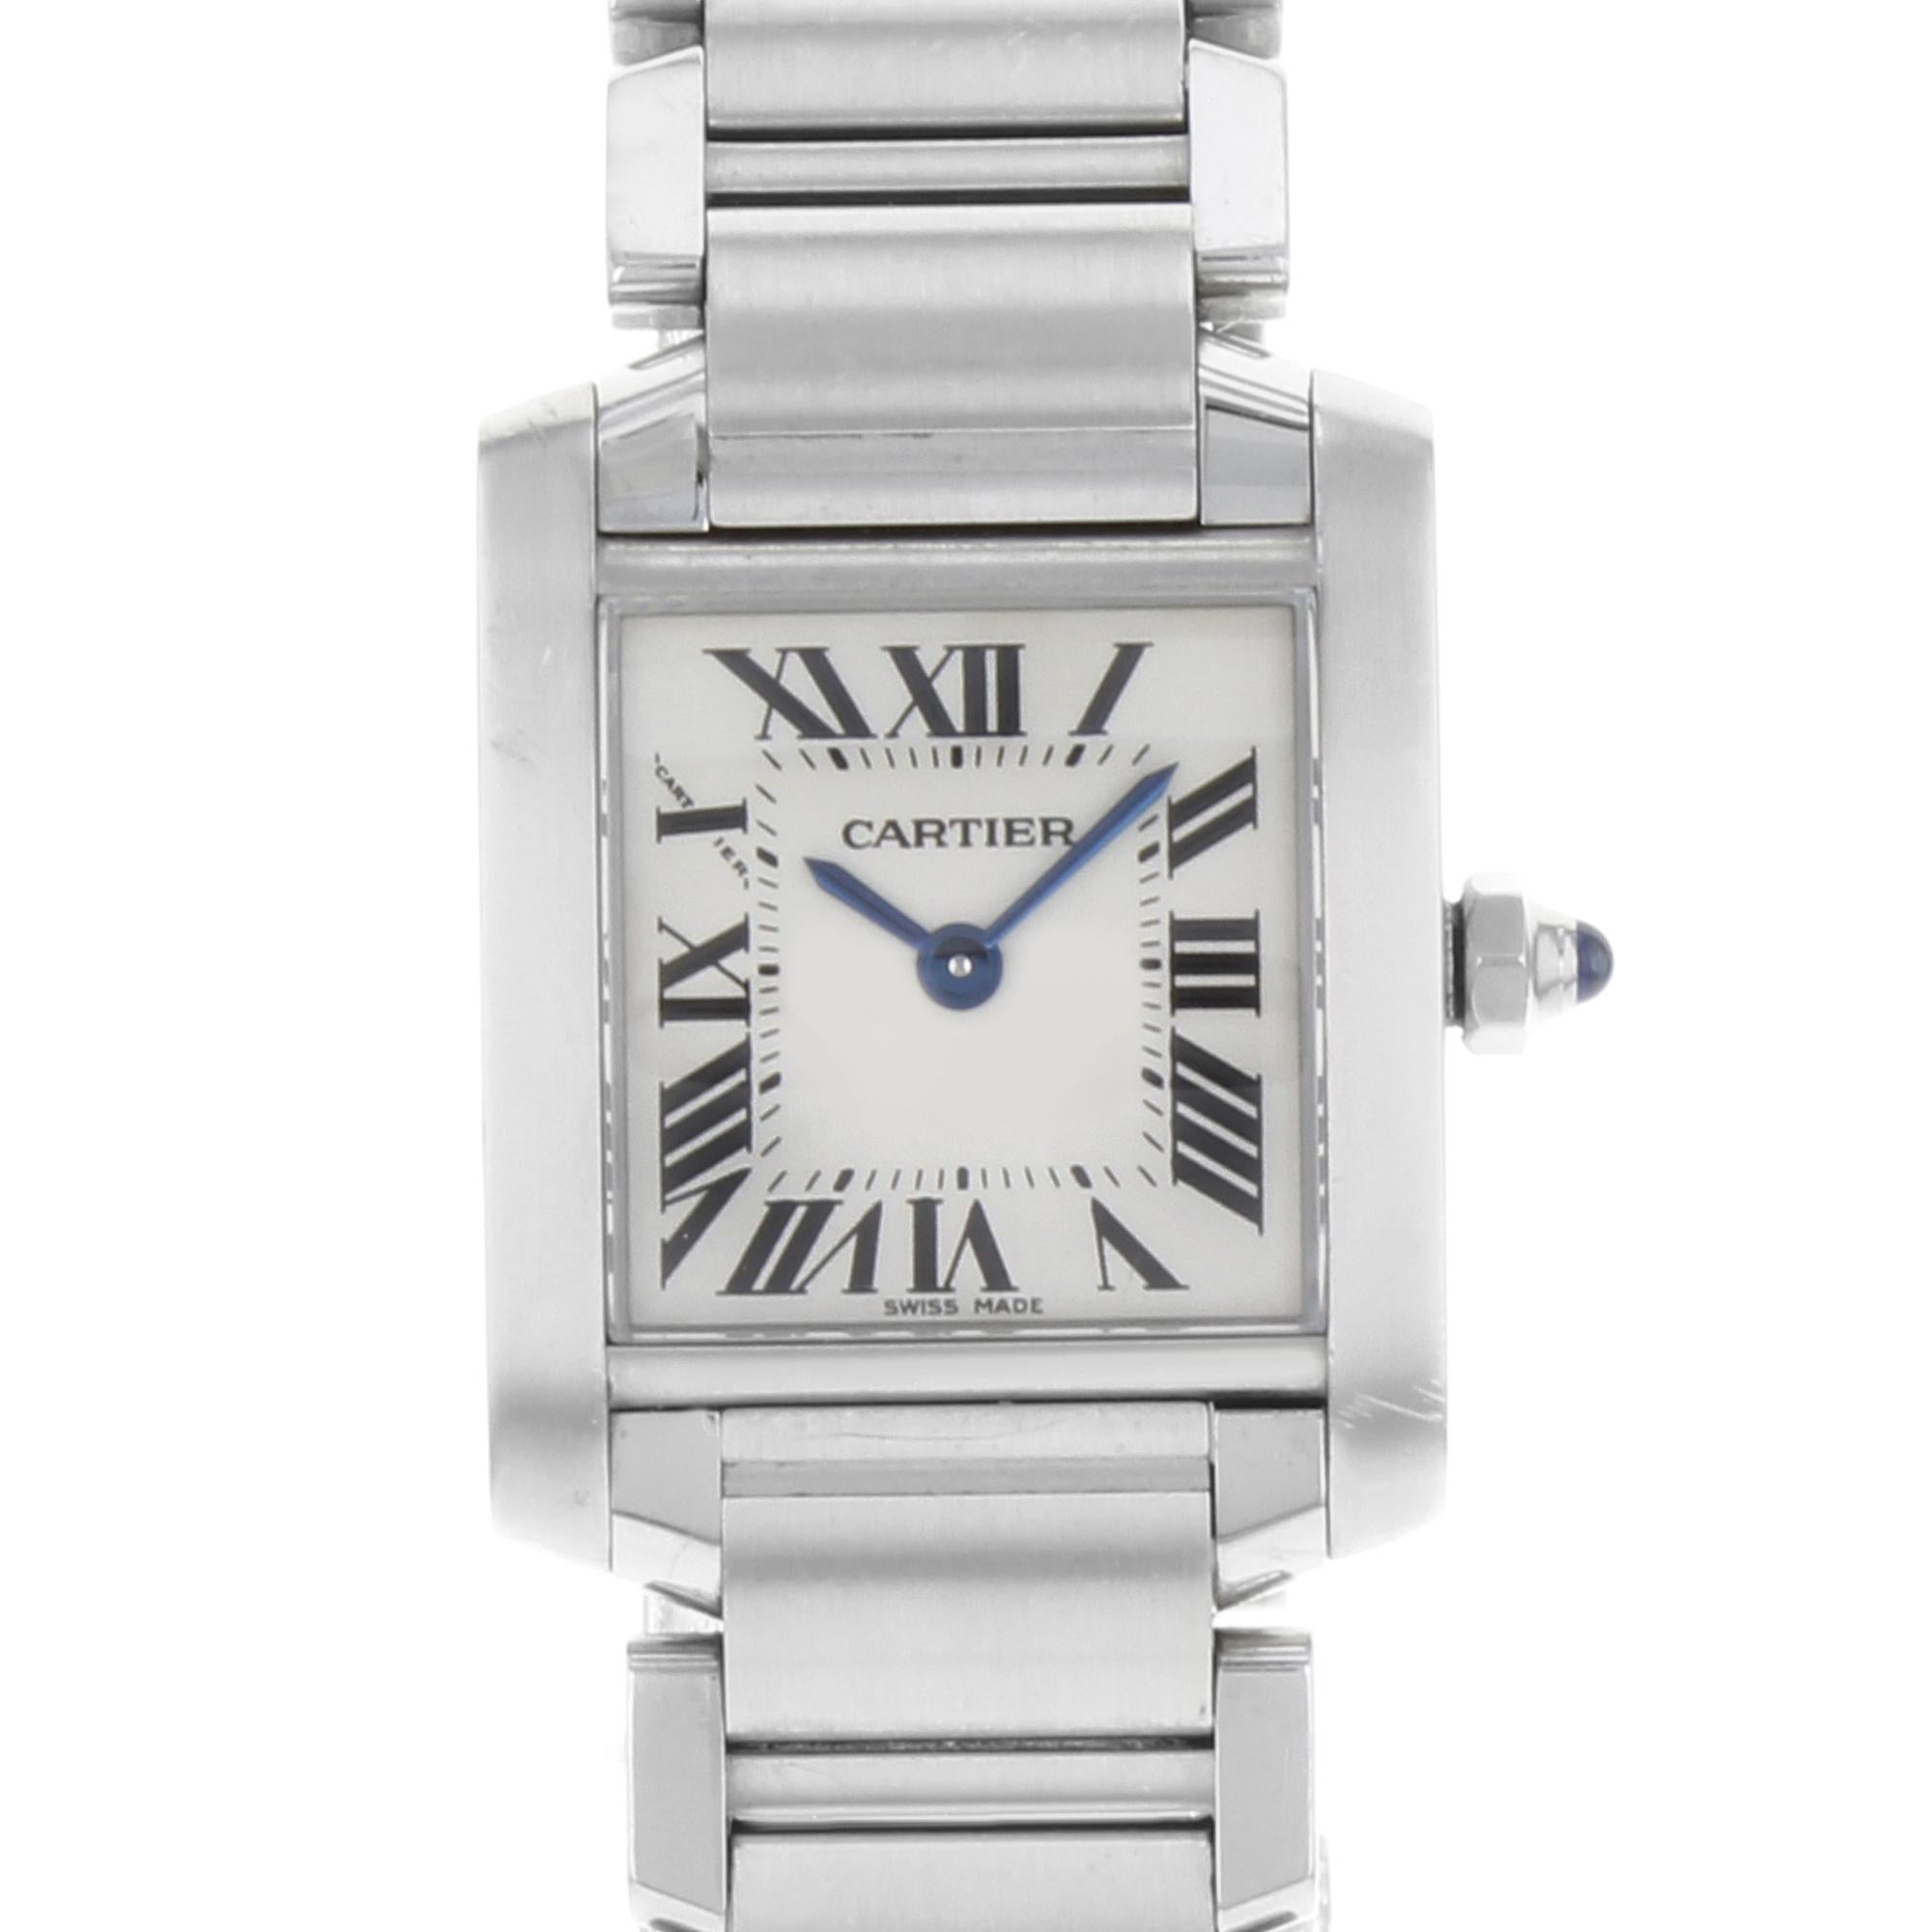 This pre-owned Cartier Tank W51008Q3  is a beautiful Ladie's timepiece that is powered by quartz (battery) movement which is cased in a stainless steel case. It has a square shape face, no features dial and has hand roman numerals style markers. It